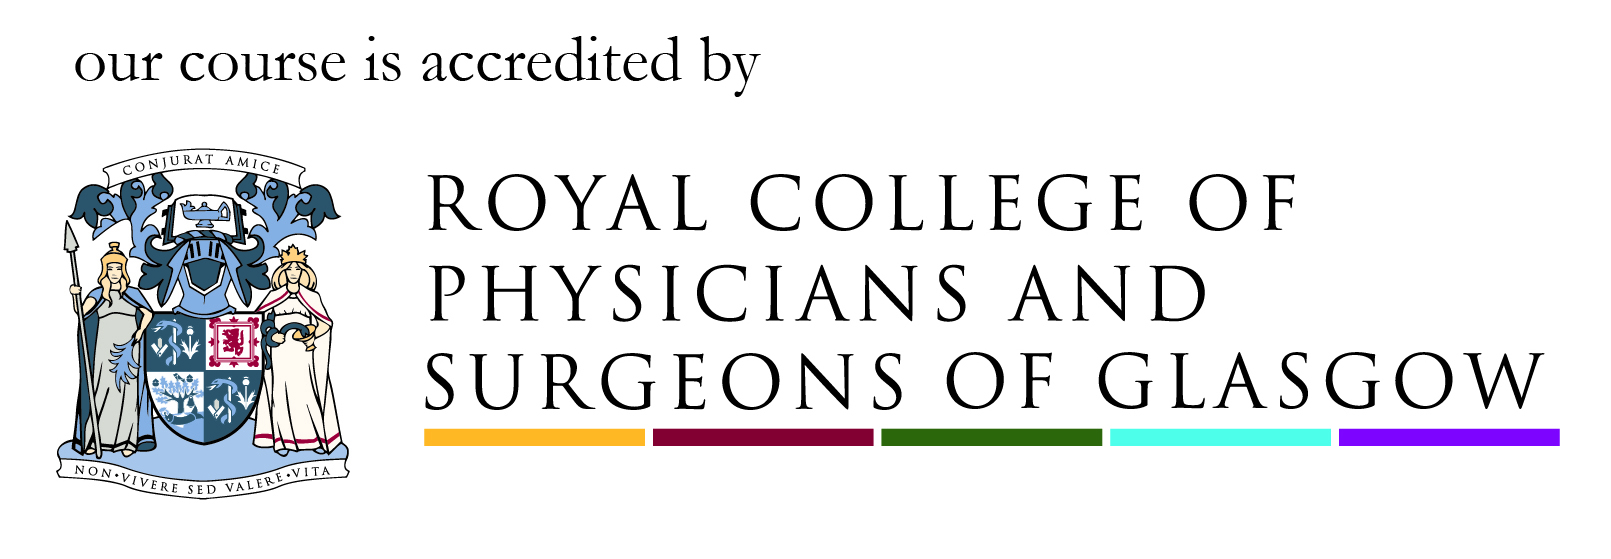 Course accredited by Royal College of Physicians and surgeons of Glasgow